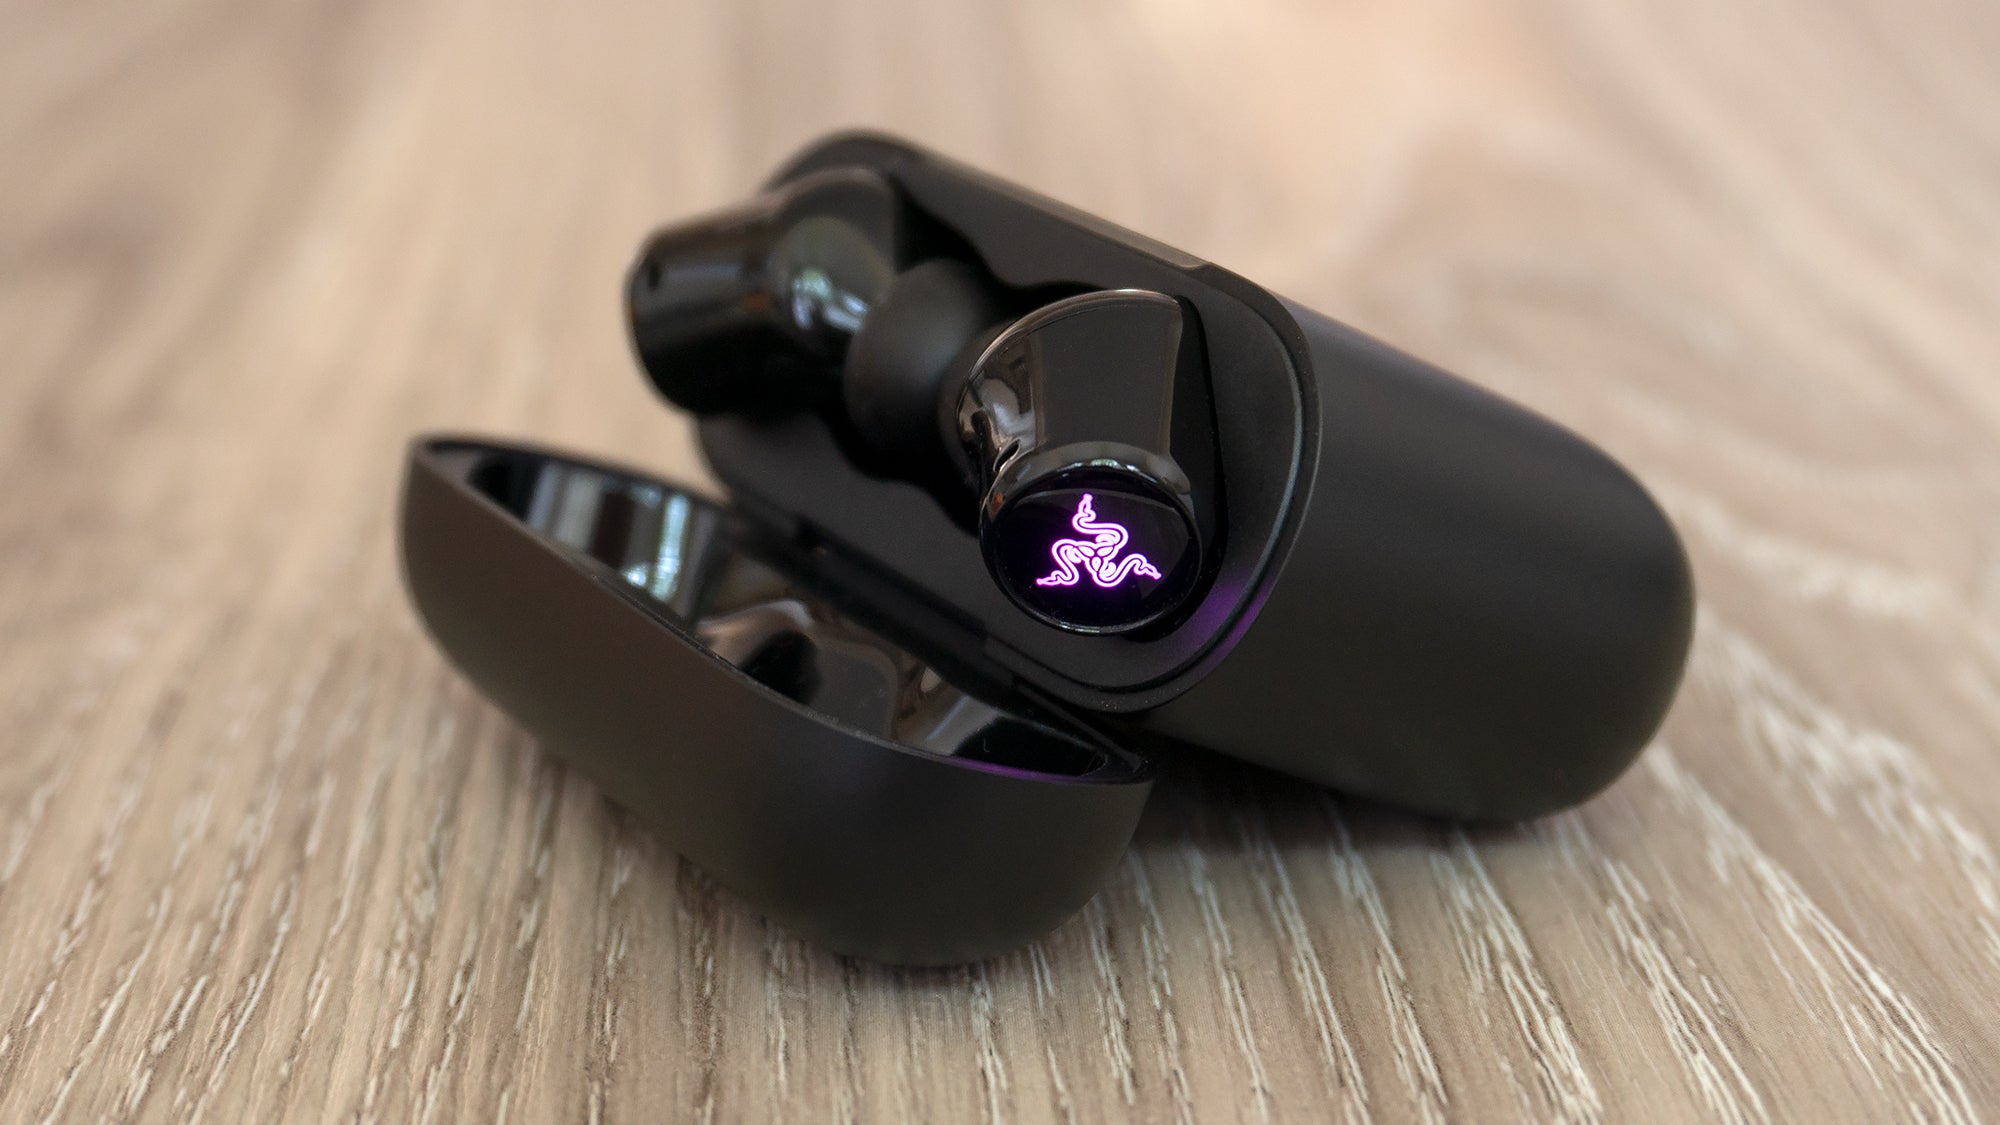 The Razer Hammerhead True Wireless Earbuds' charging case has grown, but it means you get a solid 32.5 hours of playback time in total. (Photo: Andrew Liszewski - Gizmodo)